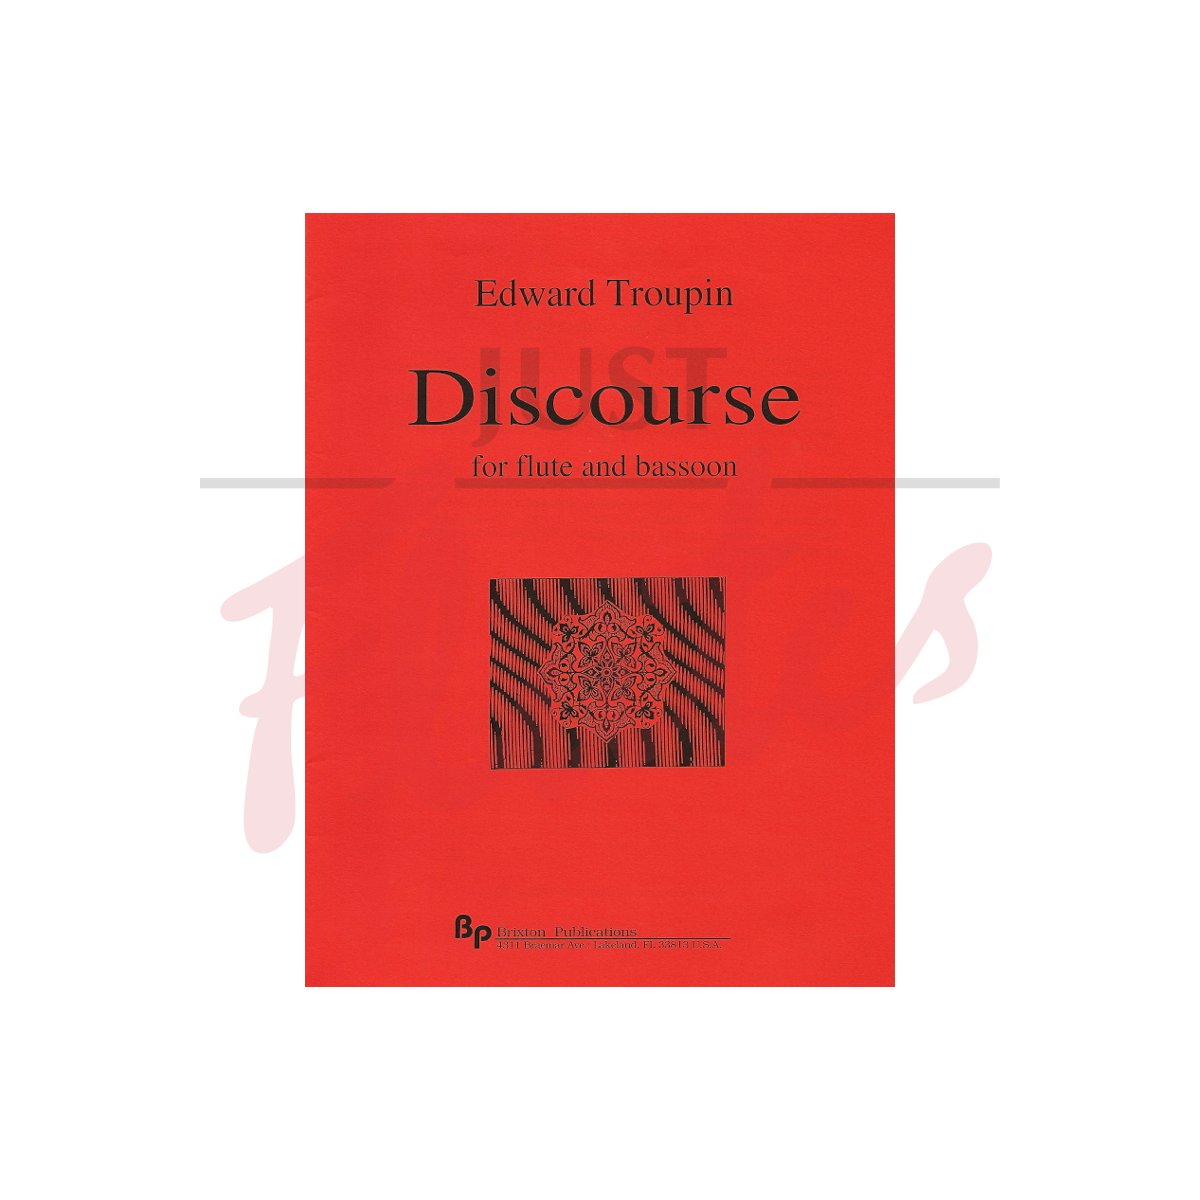 Discourse [Flute and Bassoon]